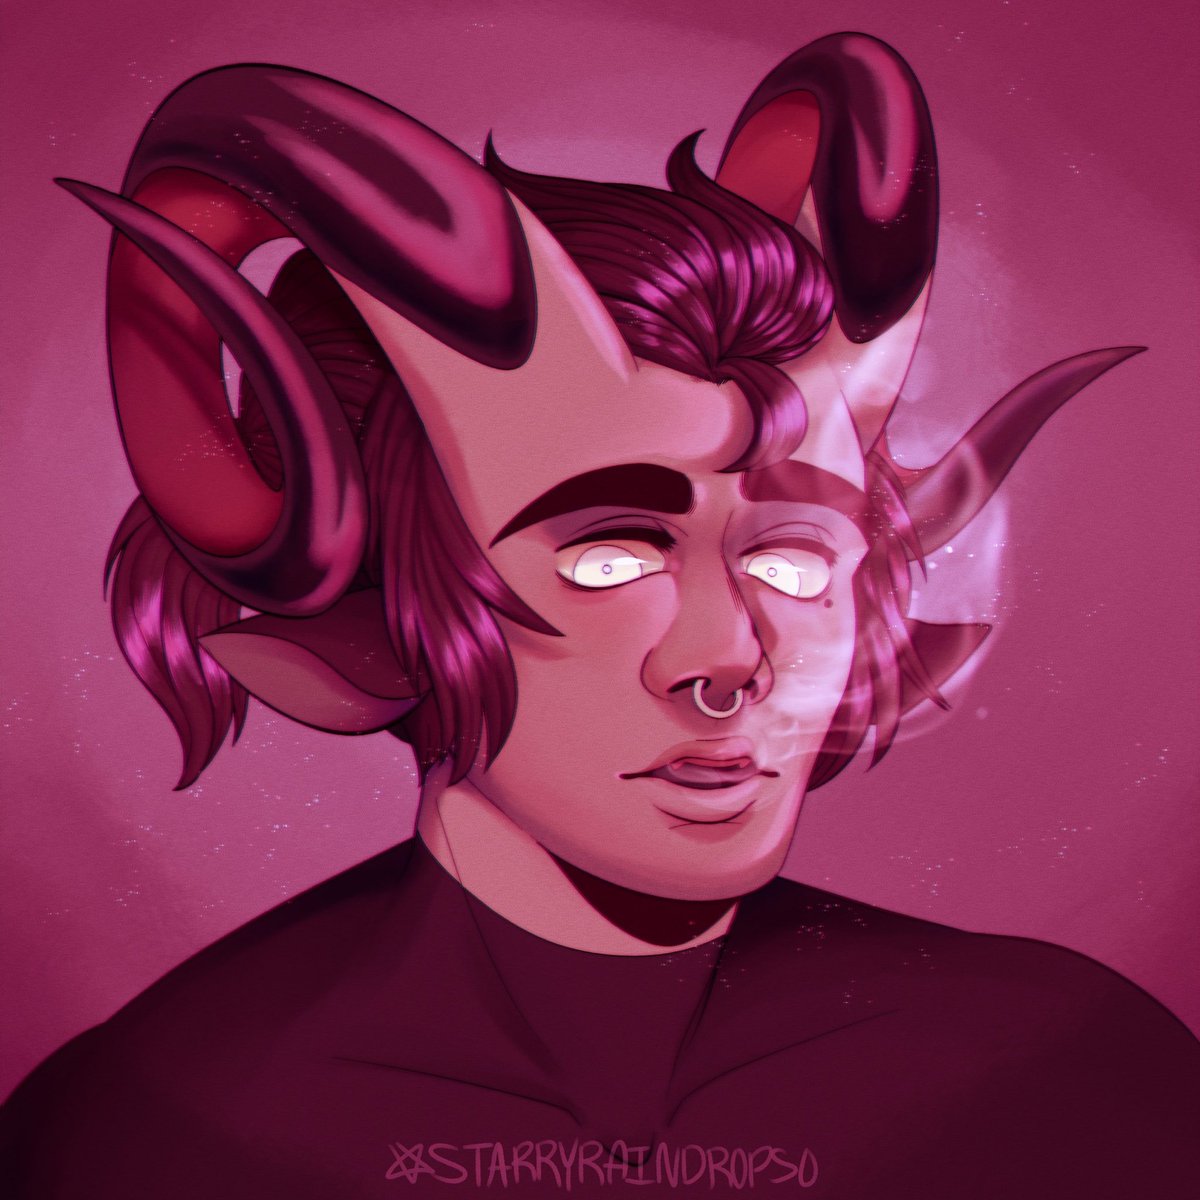   @starryraindrop : hi i'm maya, a 20 y/o digital artist (and self proclaimed angelologist) who specializes in character art and design!! i love designing monsters and mythology based characters! i also do art for edm artists i enjoy as well! ig: @ starryraindrops